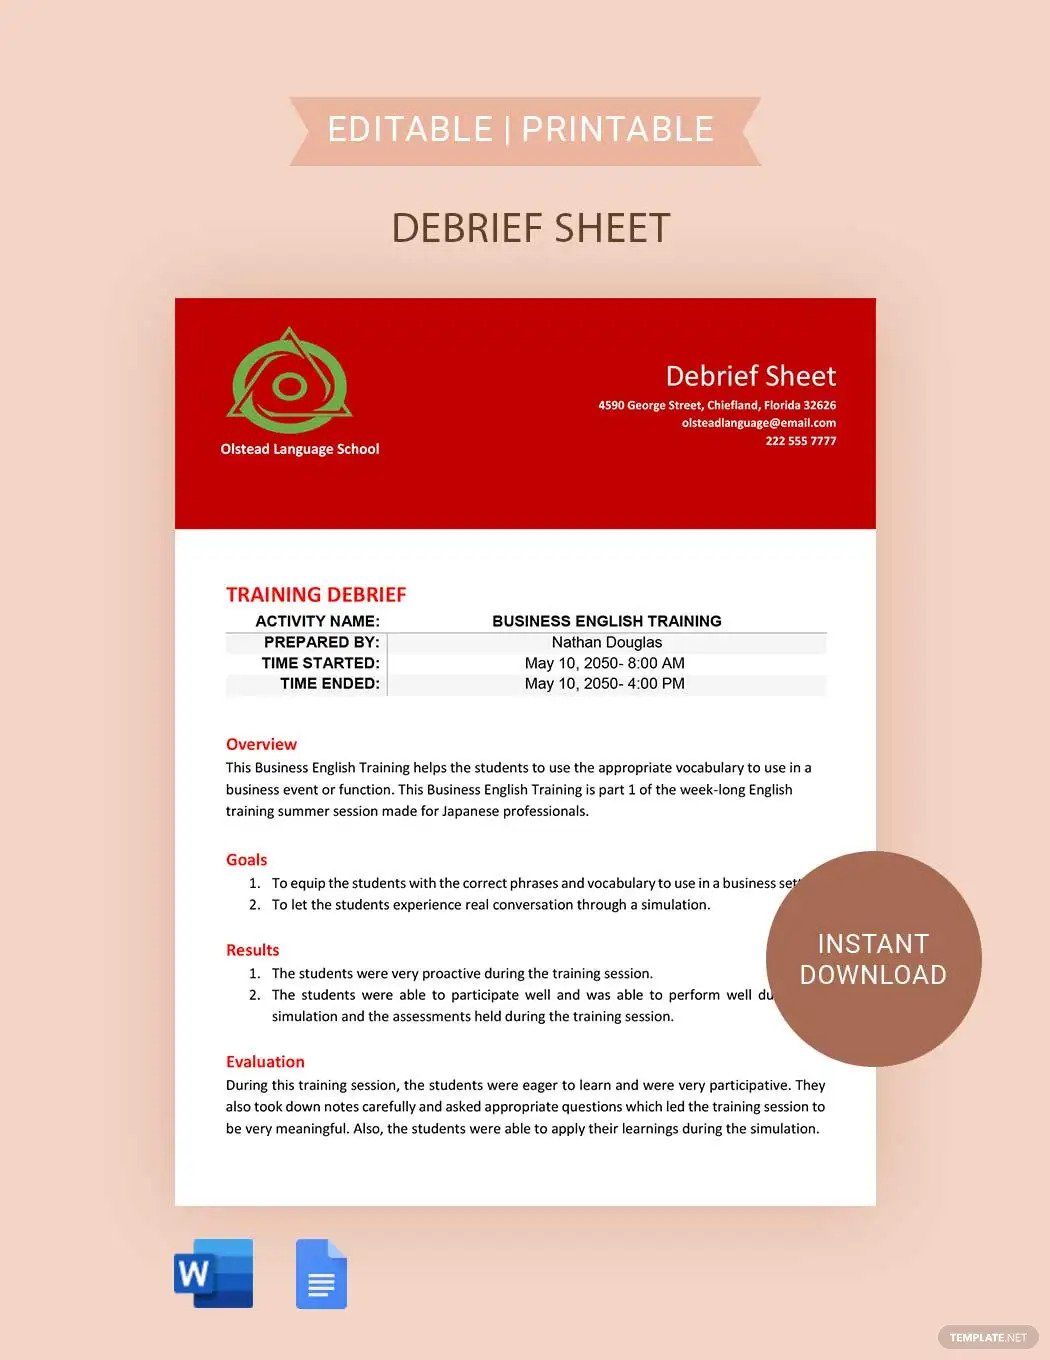 debrief sheet ideas and examples